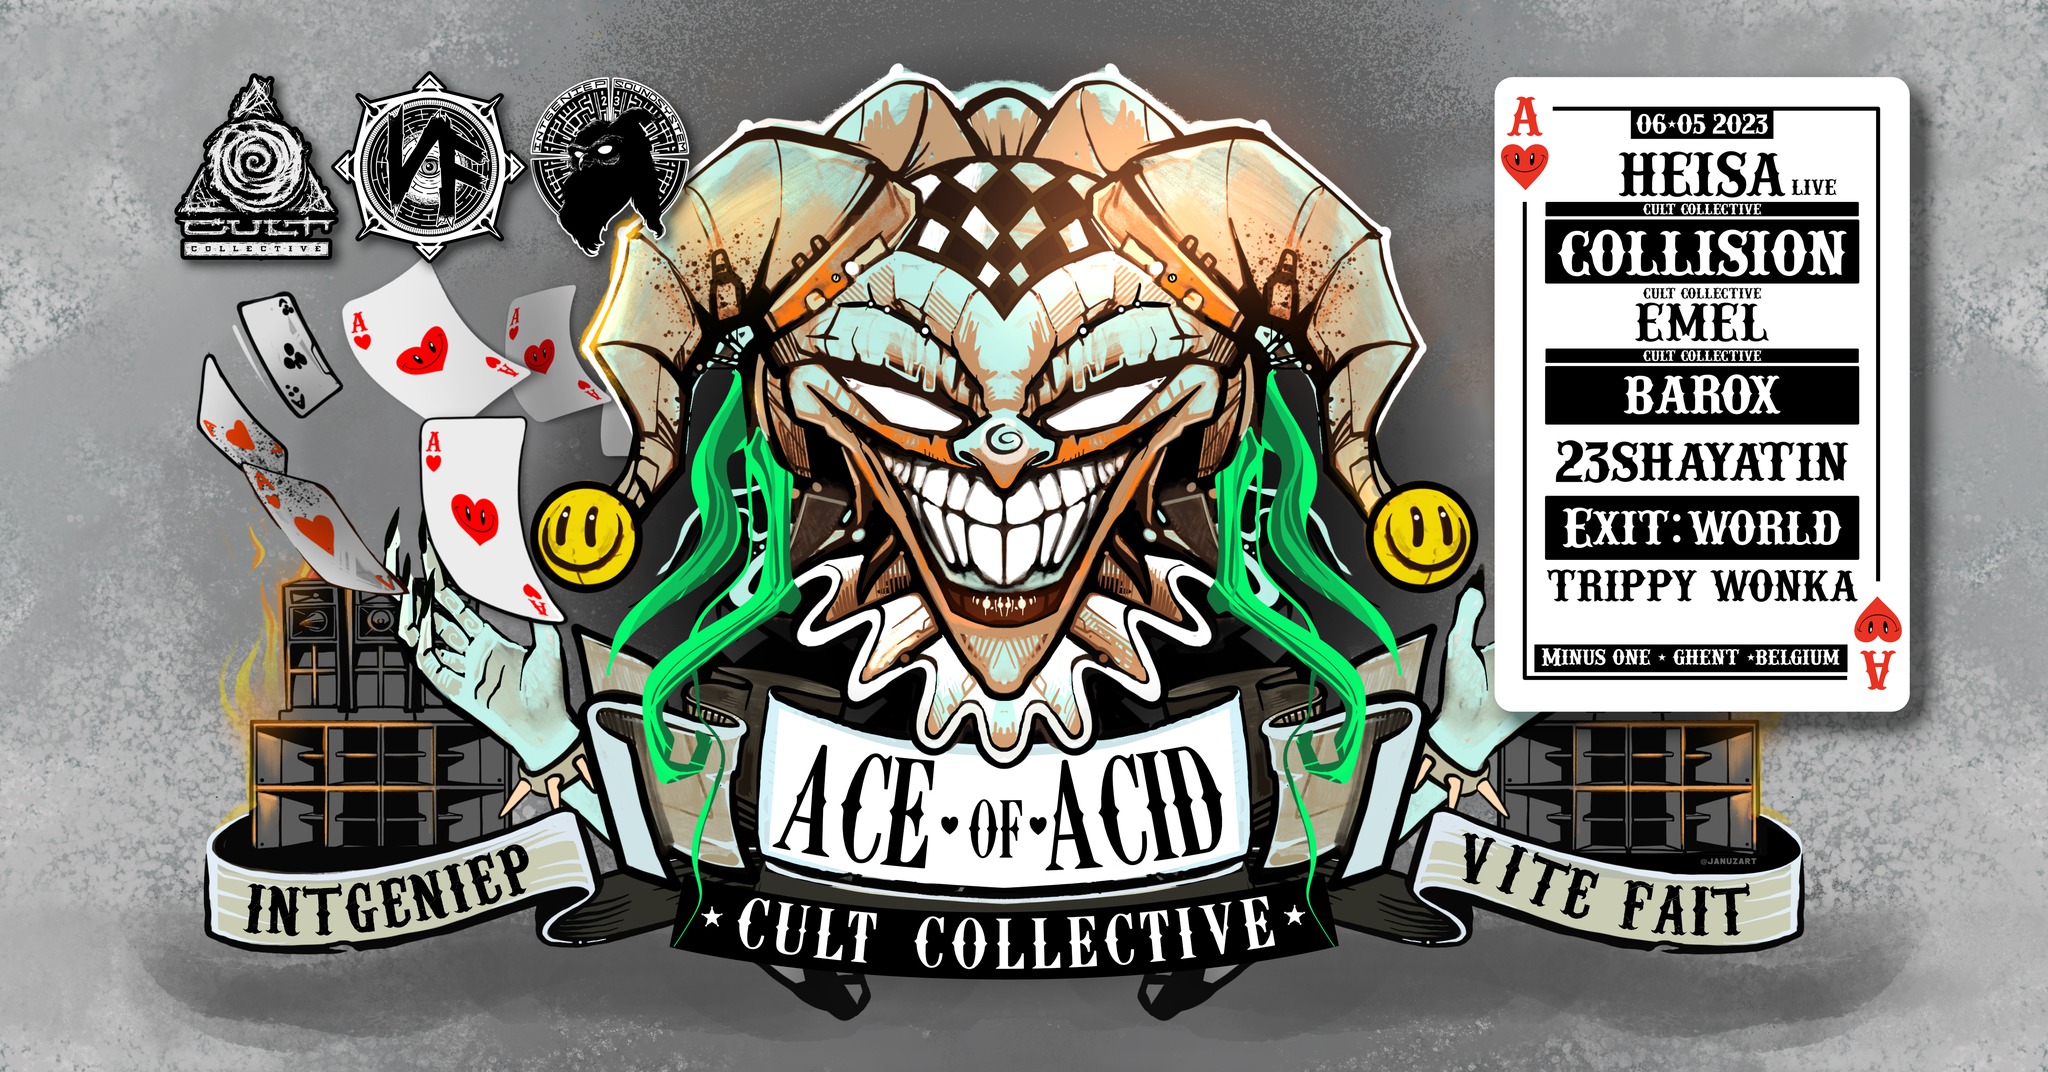 Ace Of Acid | Cult Collective